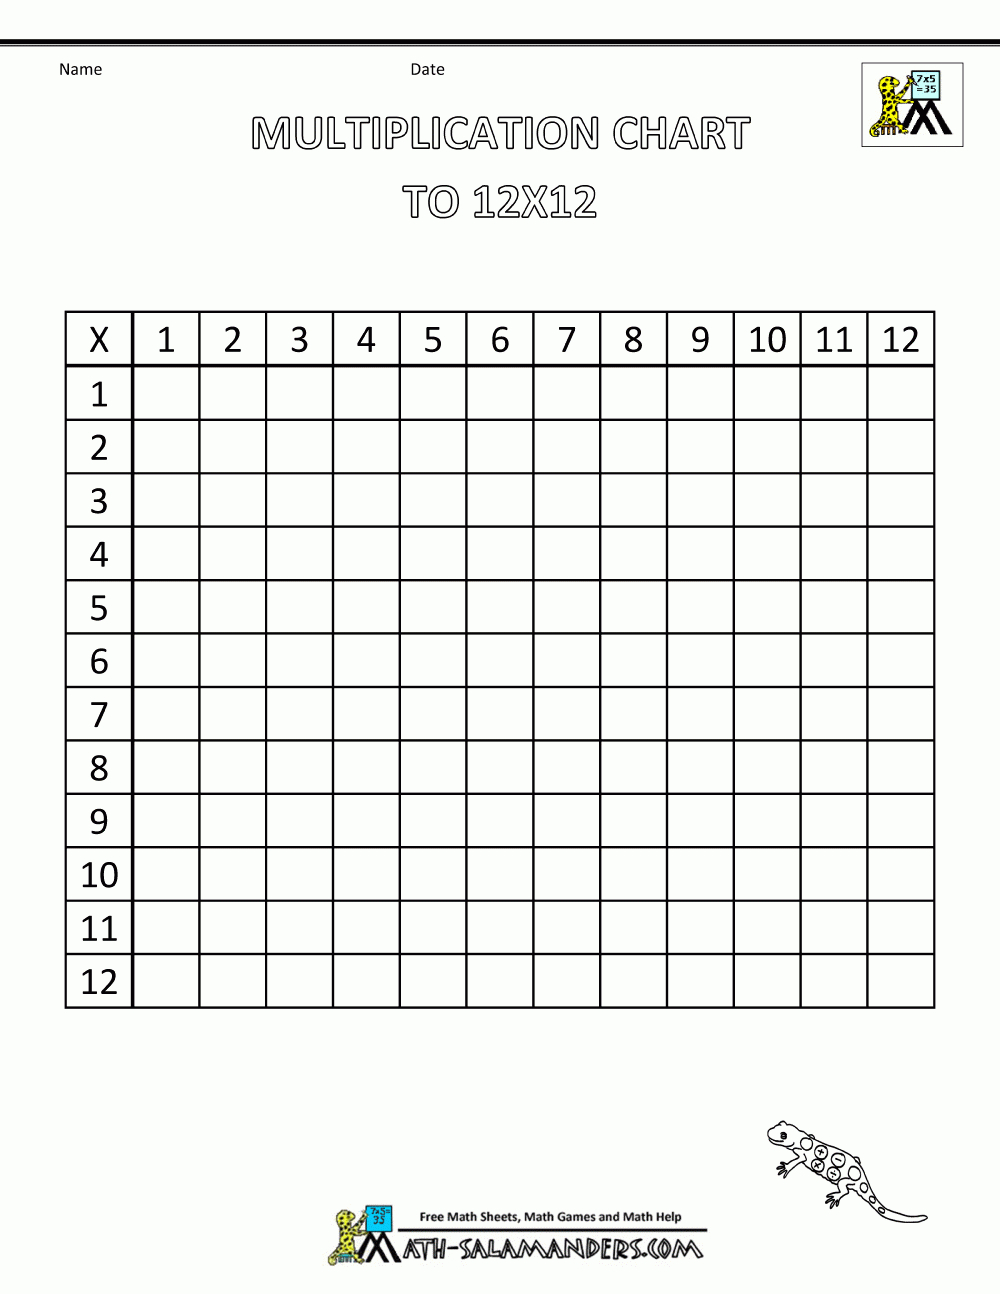 Multiplication Times Table Chart To 12X12 Blank pertaining to Printable 12X12 Multiplication Grid